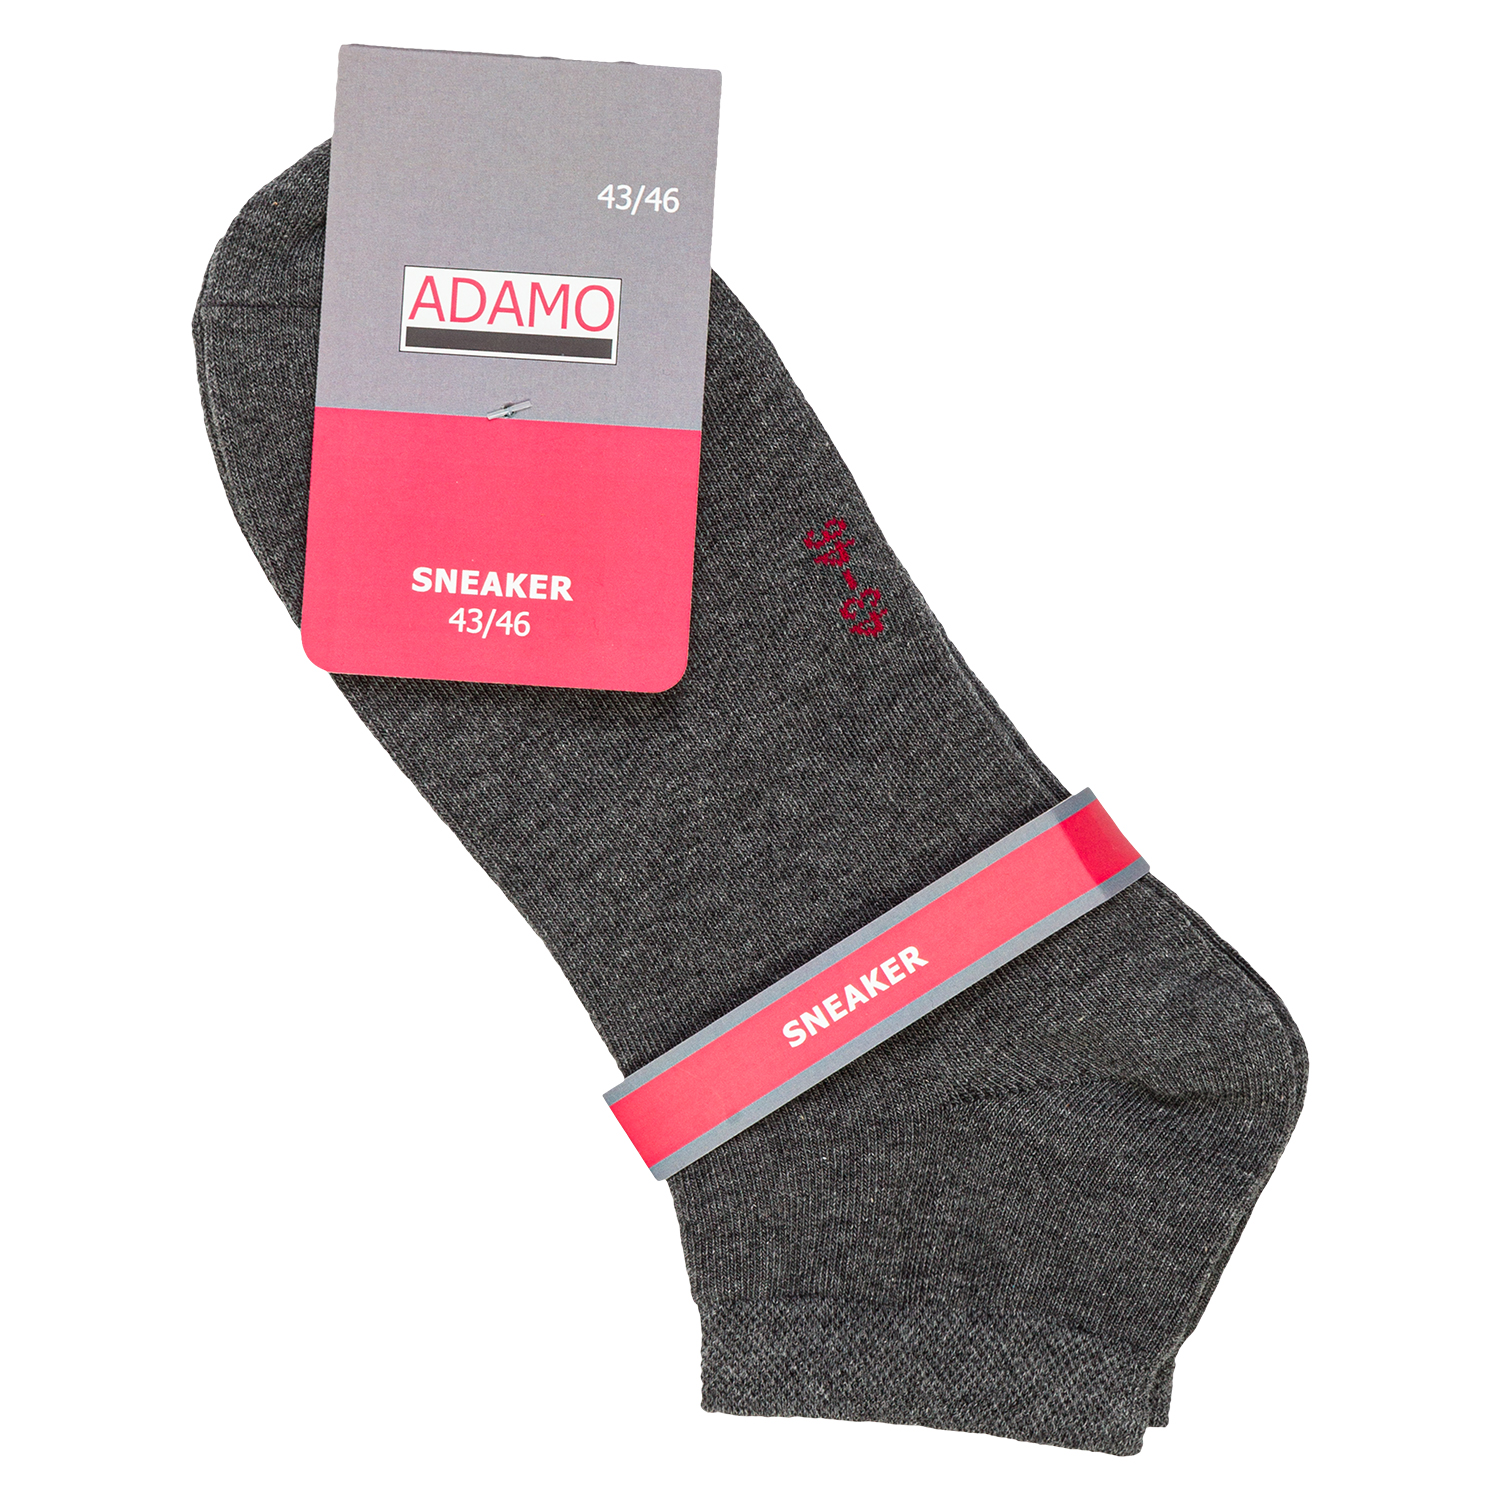 Men's sneaker sock in black pack of four up to size 51/54